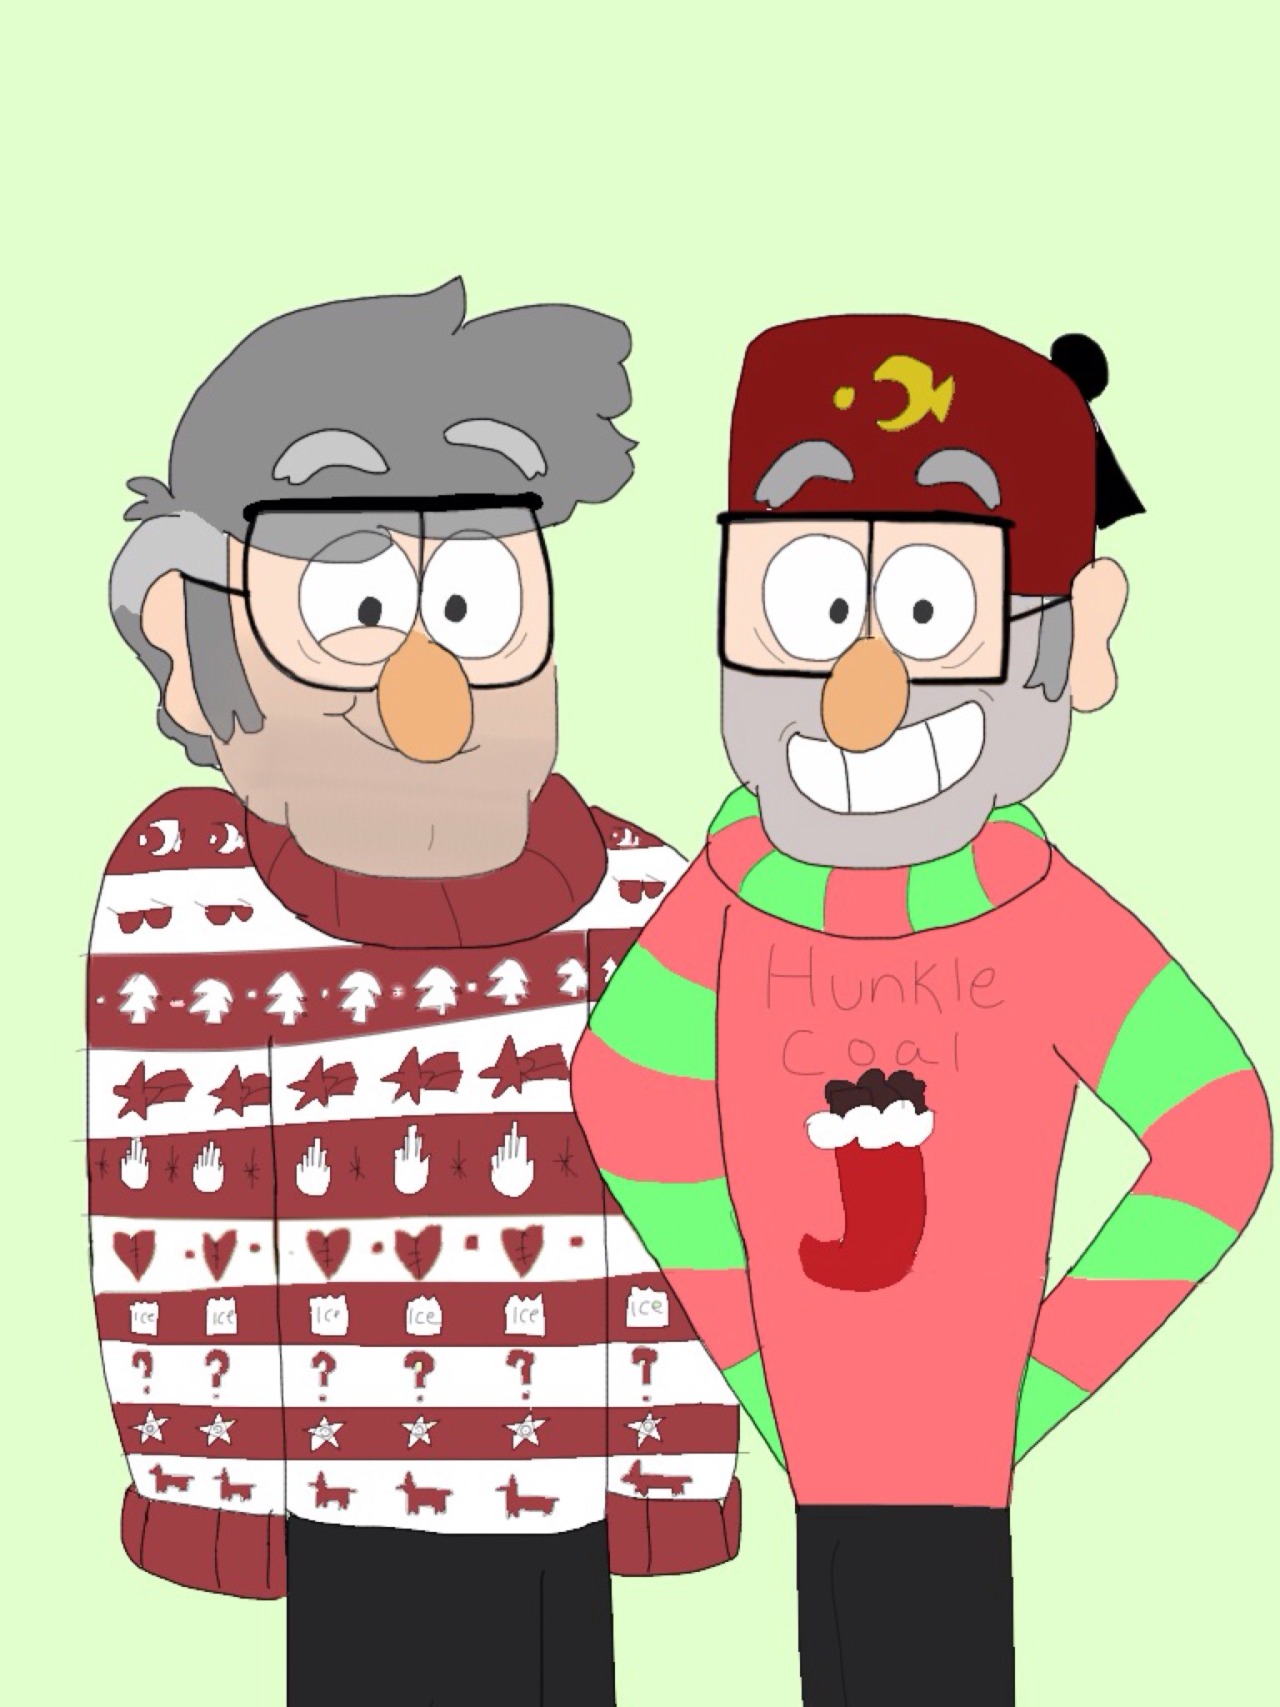 Adorable sweater grunkles :’)